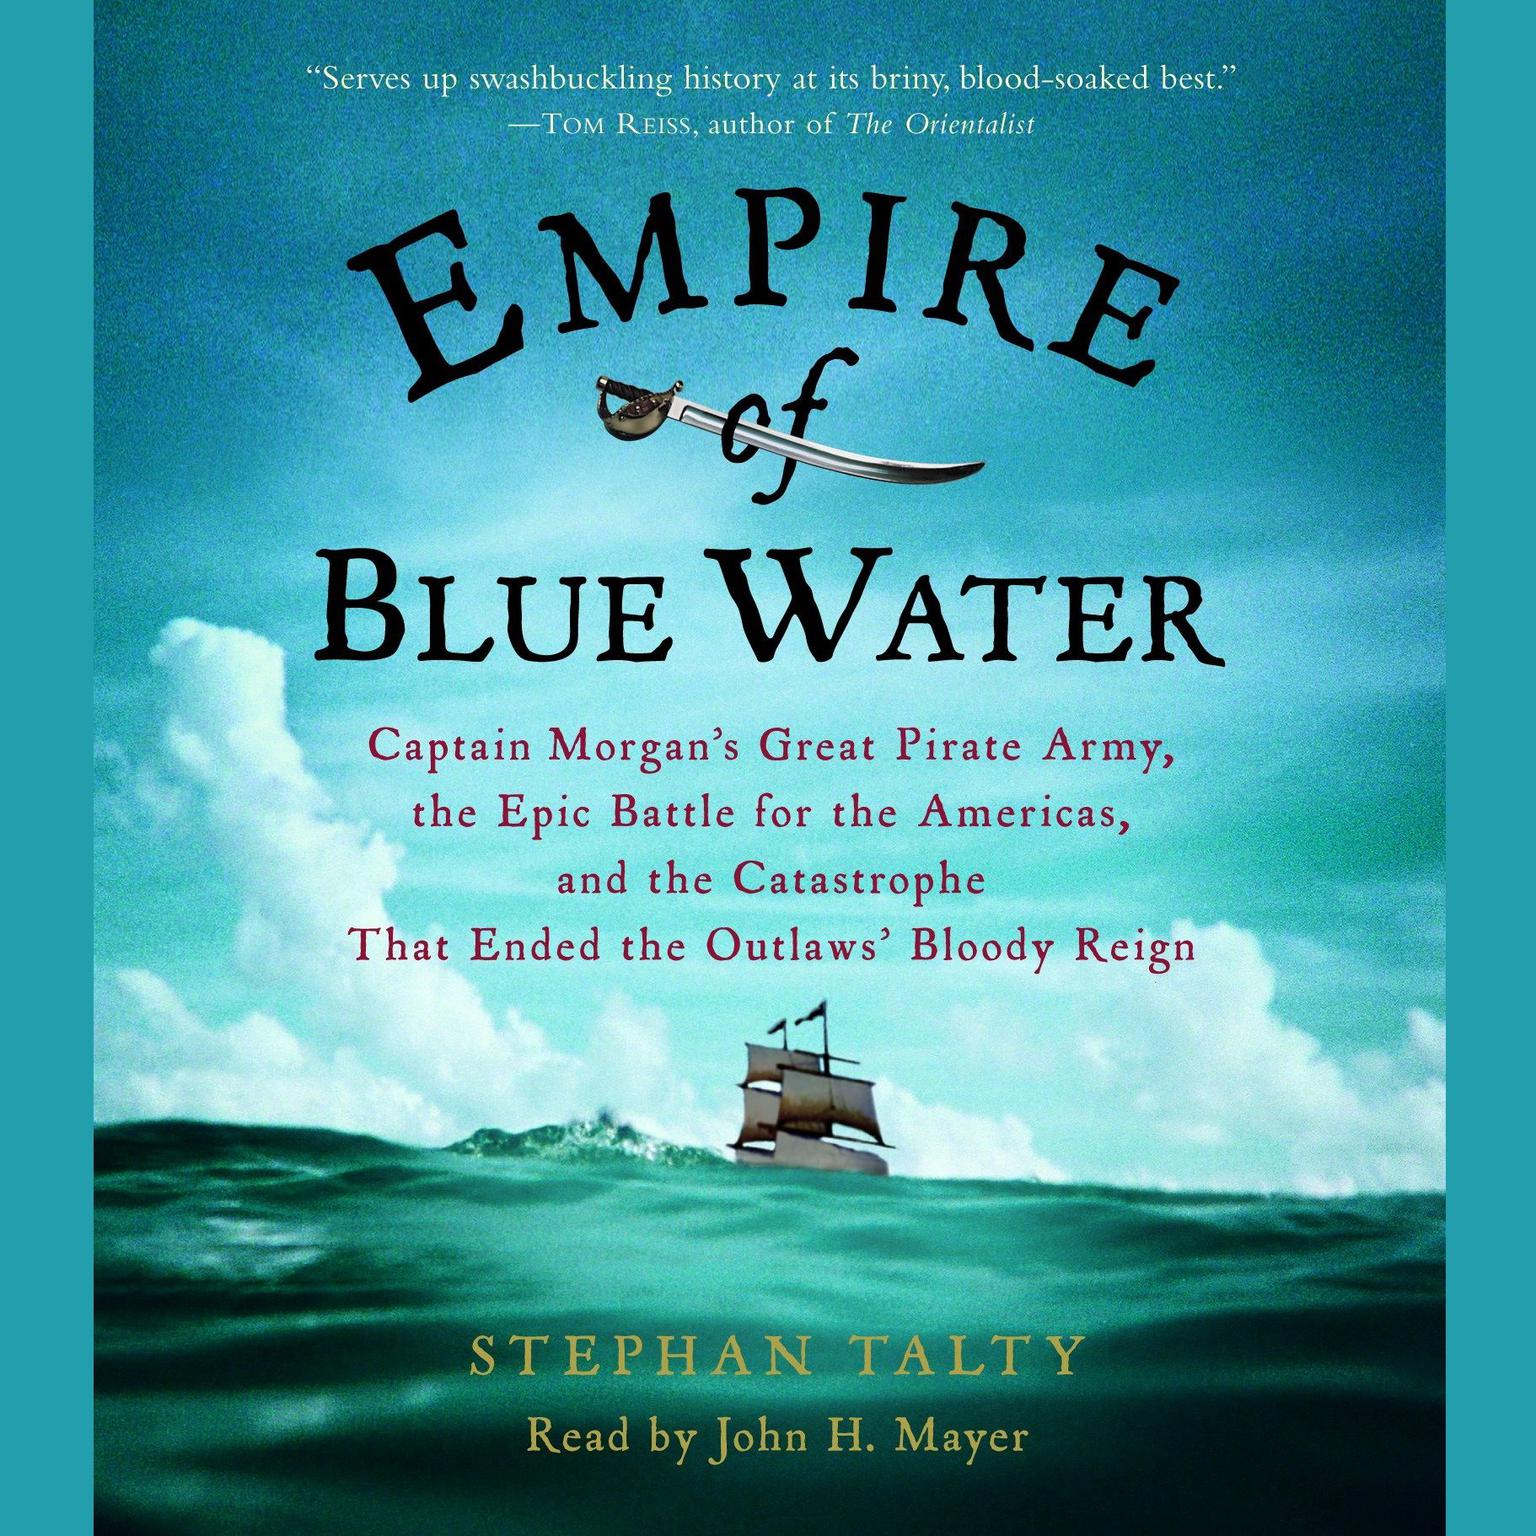 Empire of Blue Water (Abridged): Captain Morgans Great Pirate Army, the Epic Battle for the Americas, and the Catastrophe That Ended the Outlaws Bloody Reign Audiobook, by Stephan Talty